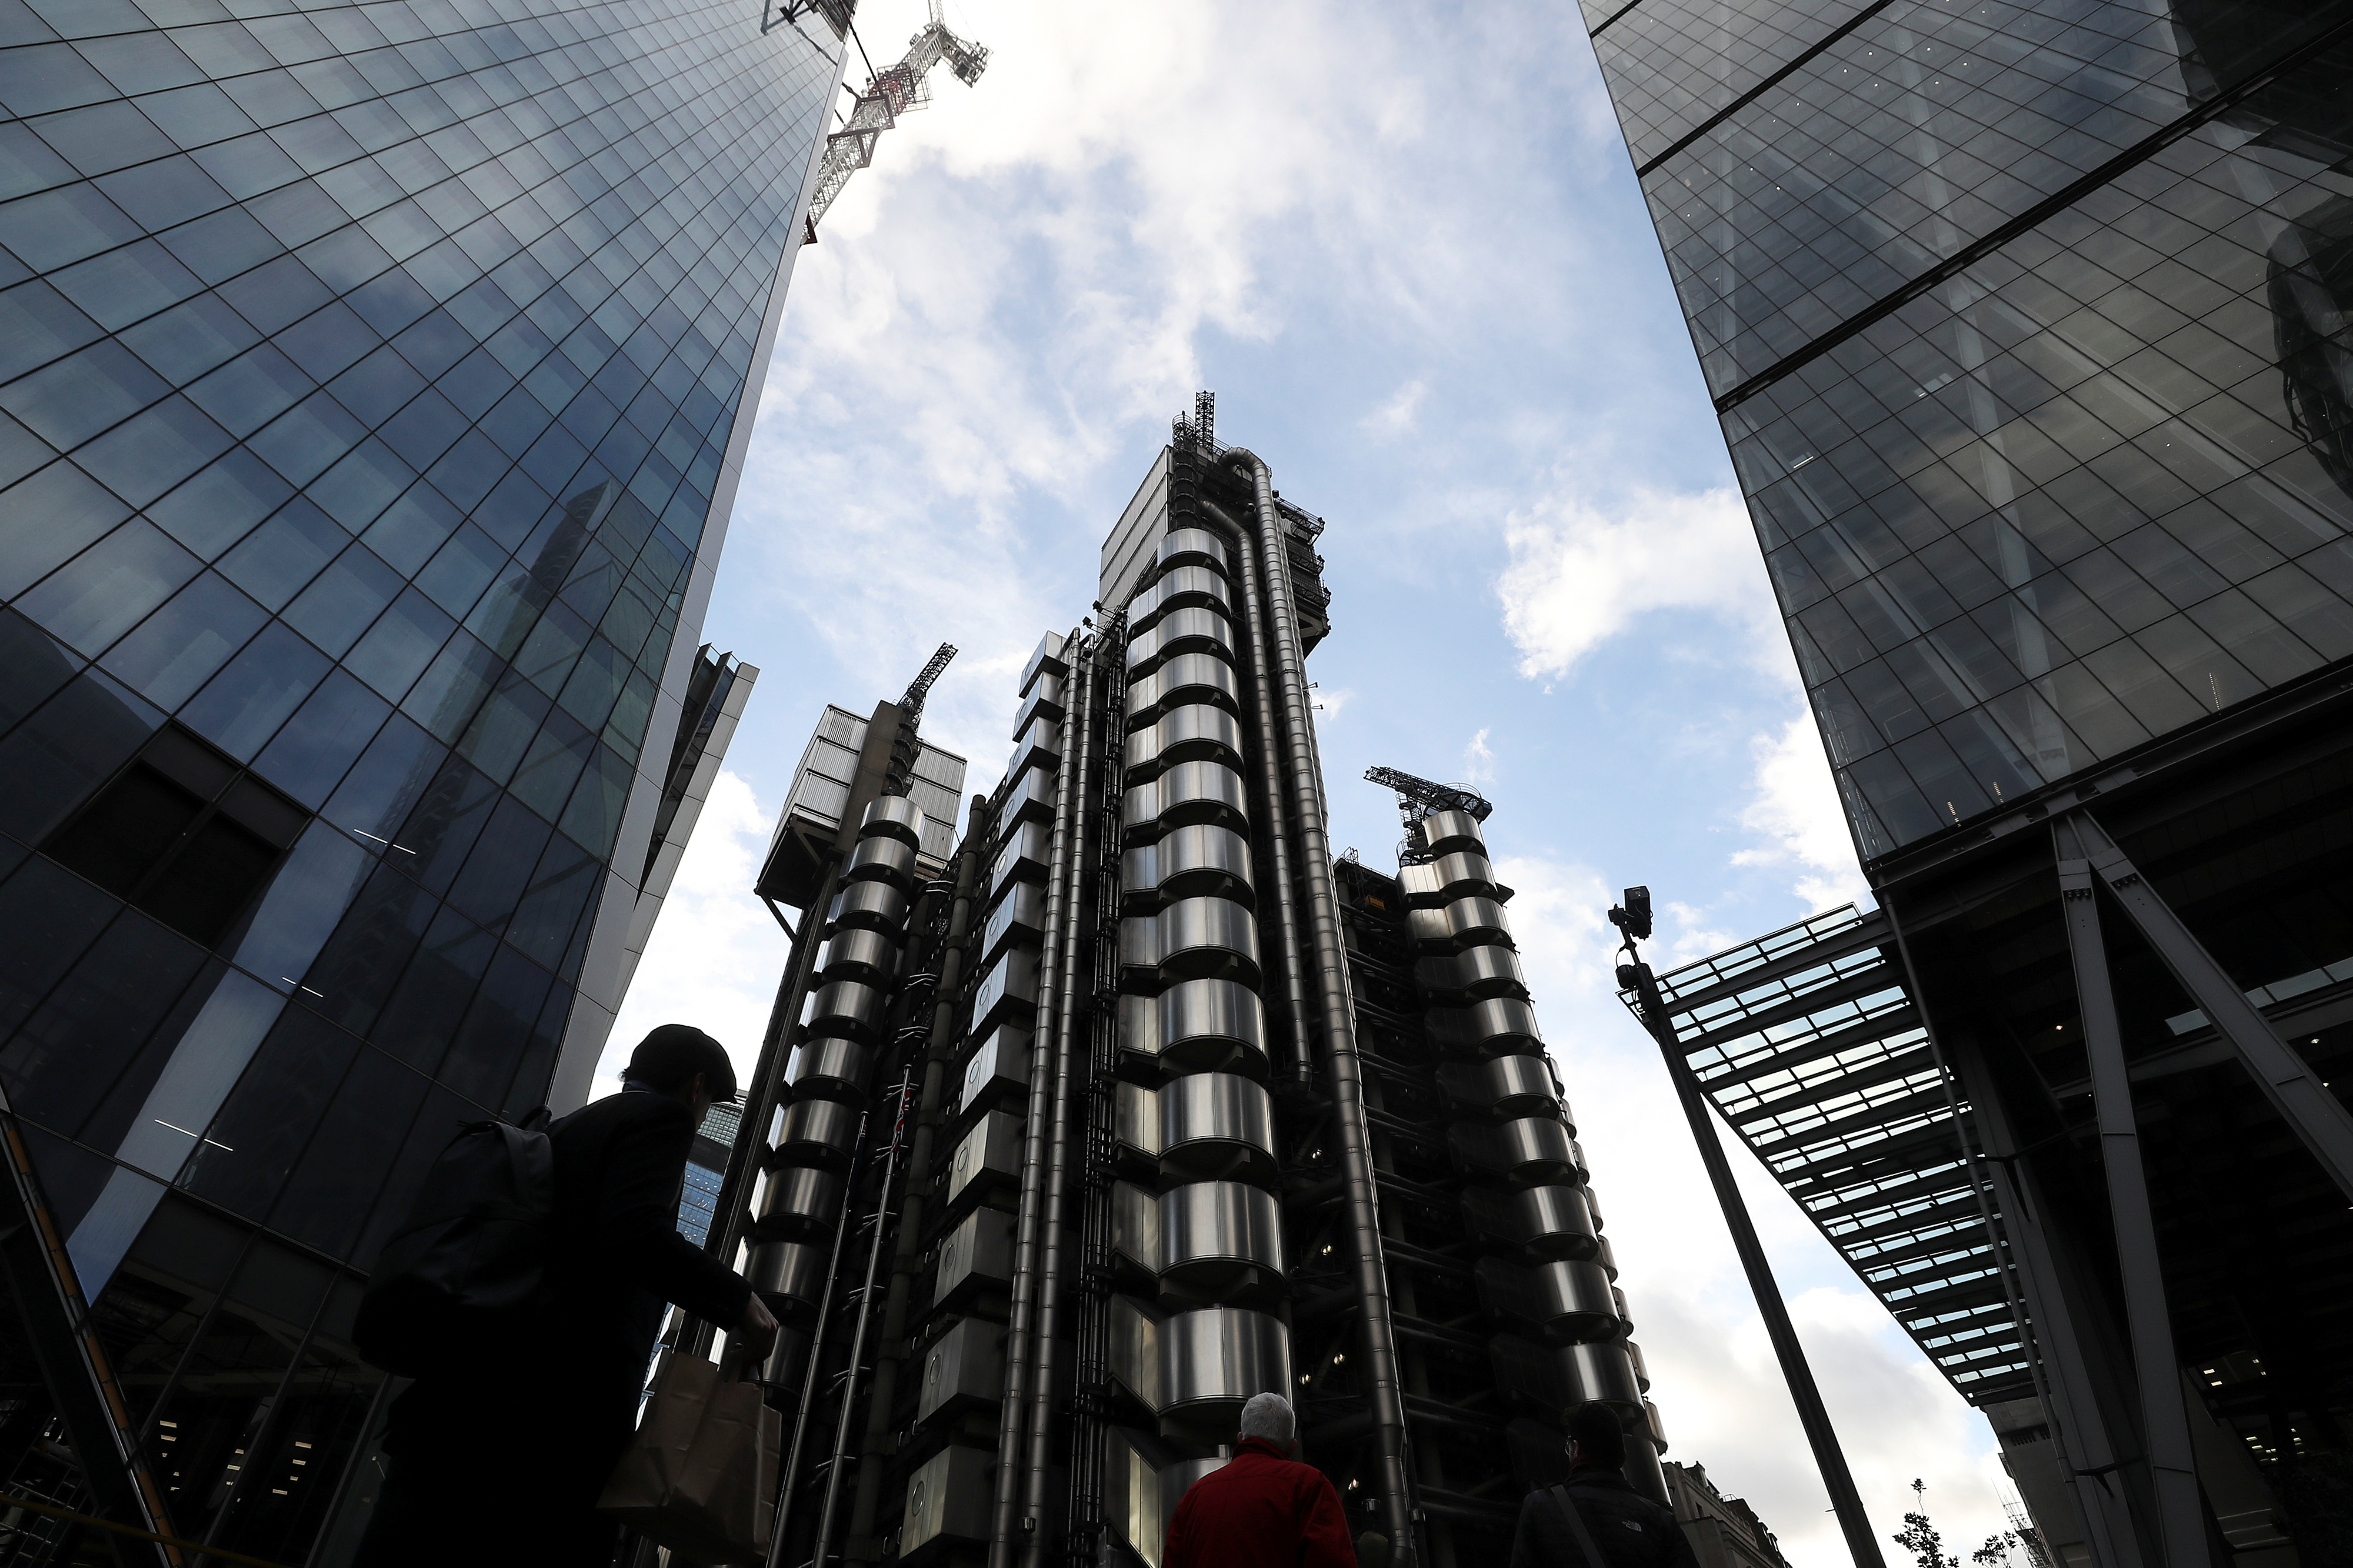 The Lloyd's of London building is lit by winter sun in the City of London financial district in London